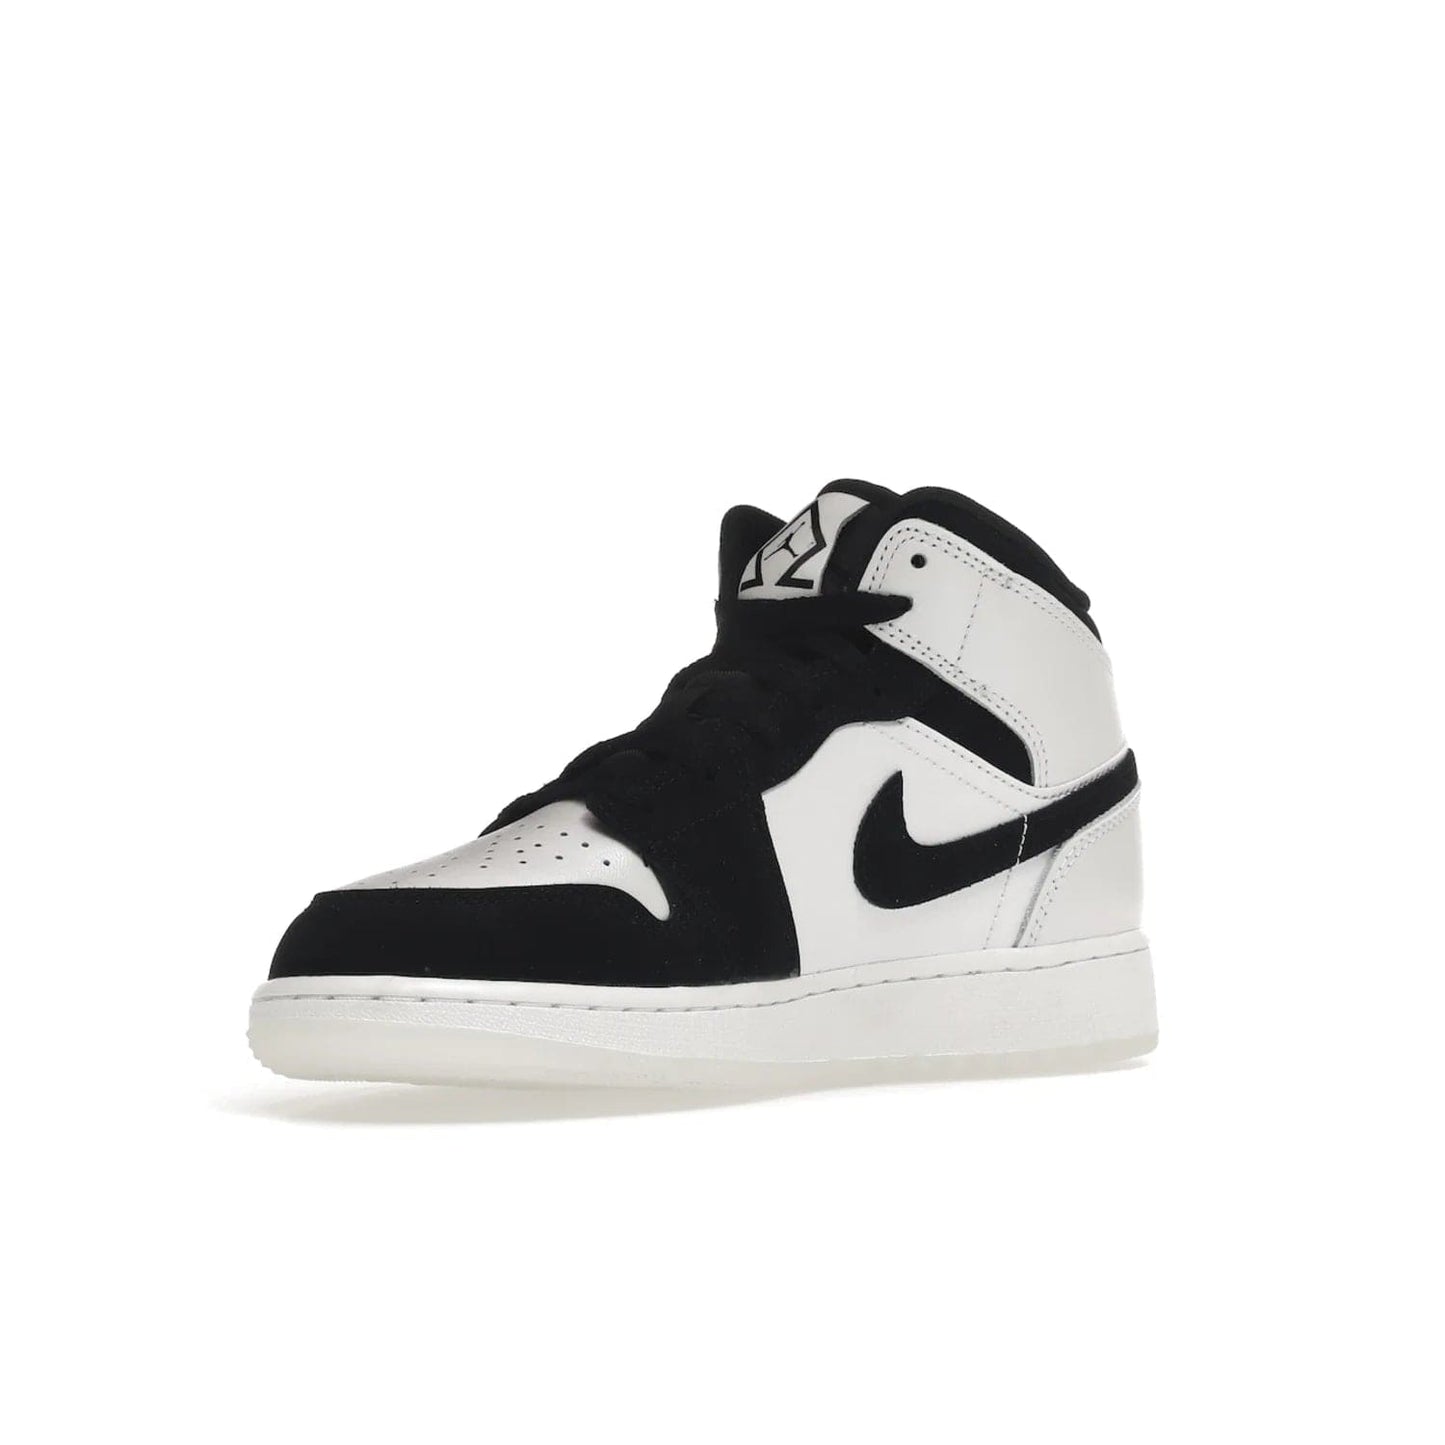 Jordan 1 Mid Diamond Shorts (GS) - Image 15 - Only at www.BallersClubKickz.com - Get the Jordan 1 Mid Diamond Shorts GS on 9th Feb 2022! Features a white, black & suede design with nylon tongue, stamped wings logo, rubber midsole & outsole. Only $100!